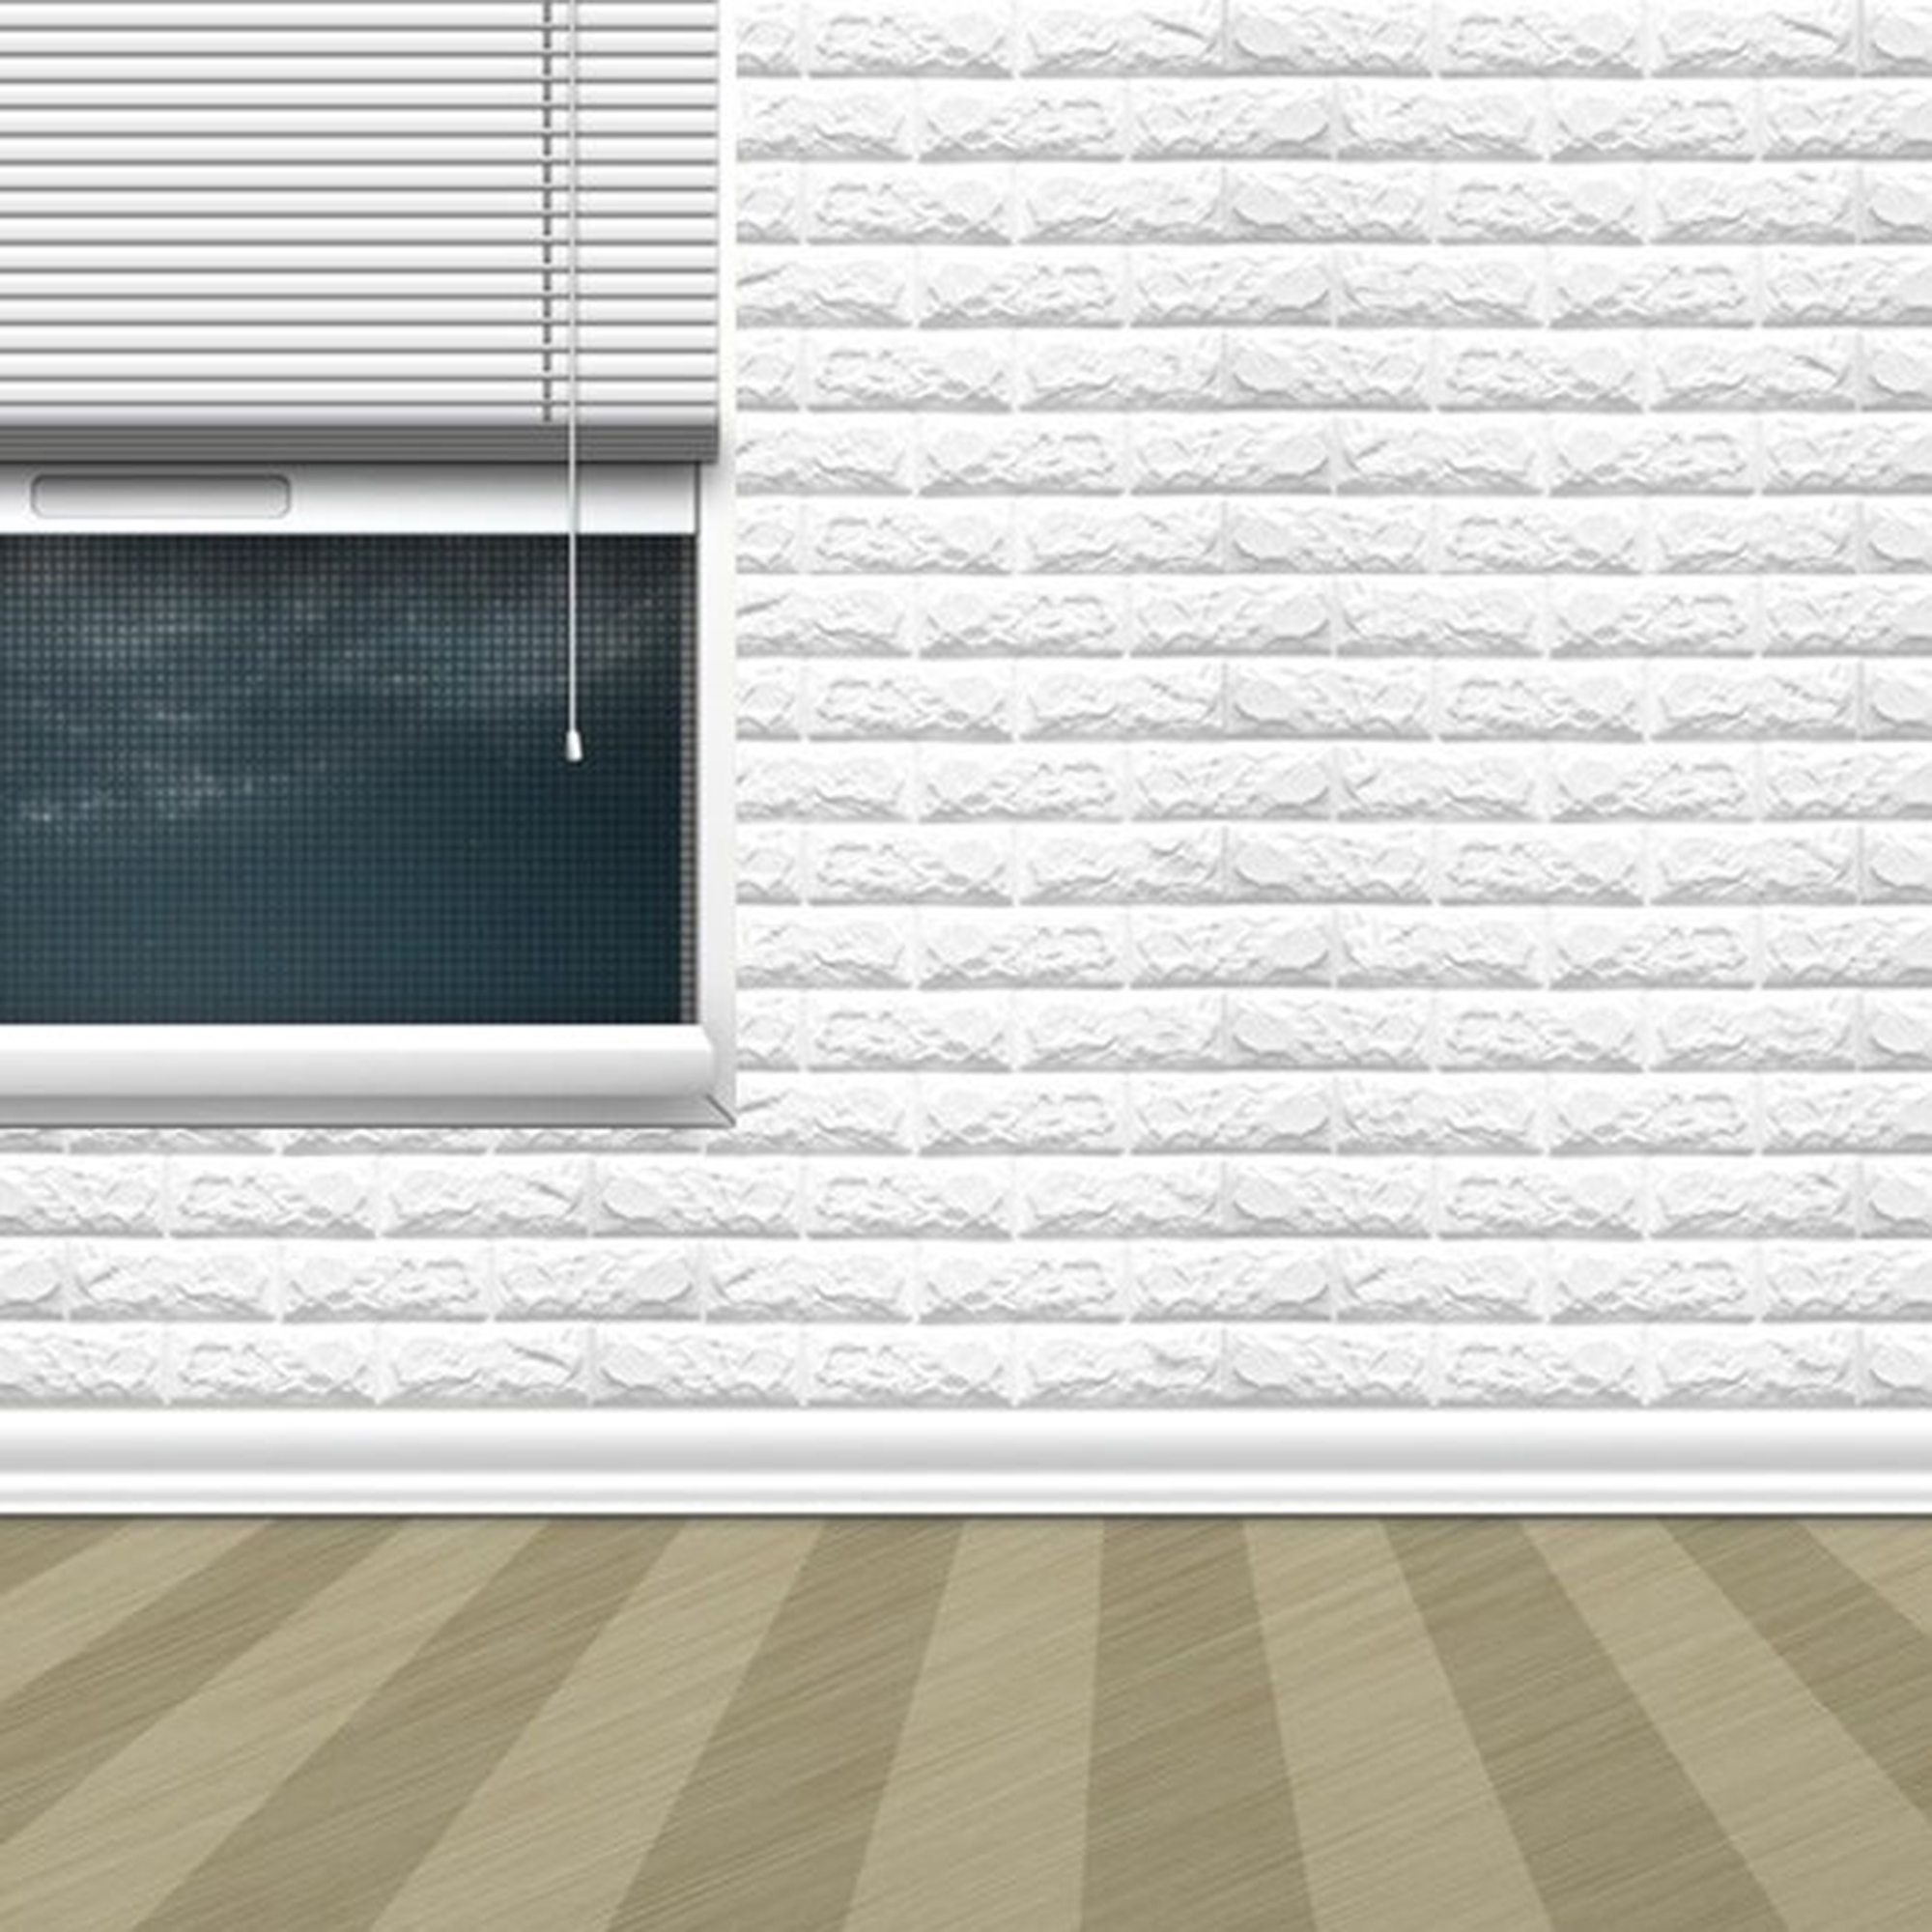 3D Brick Pattern Wall Wallpaper White Brick Self-Adhesive 3D Wall Panels Peel and Stick Wallpaper Bedroom Living Room Wall Sticker Decoration - image 4 of 7